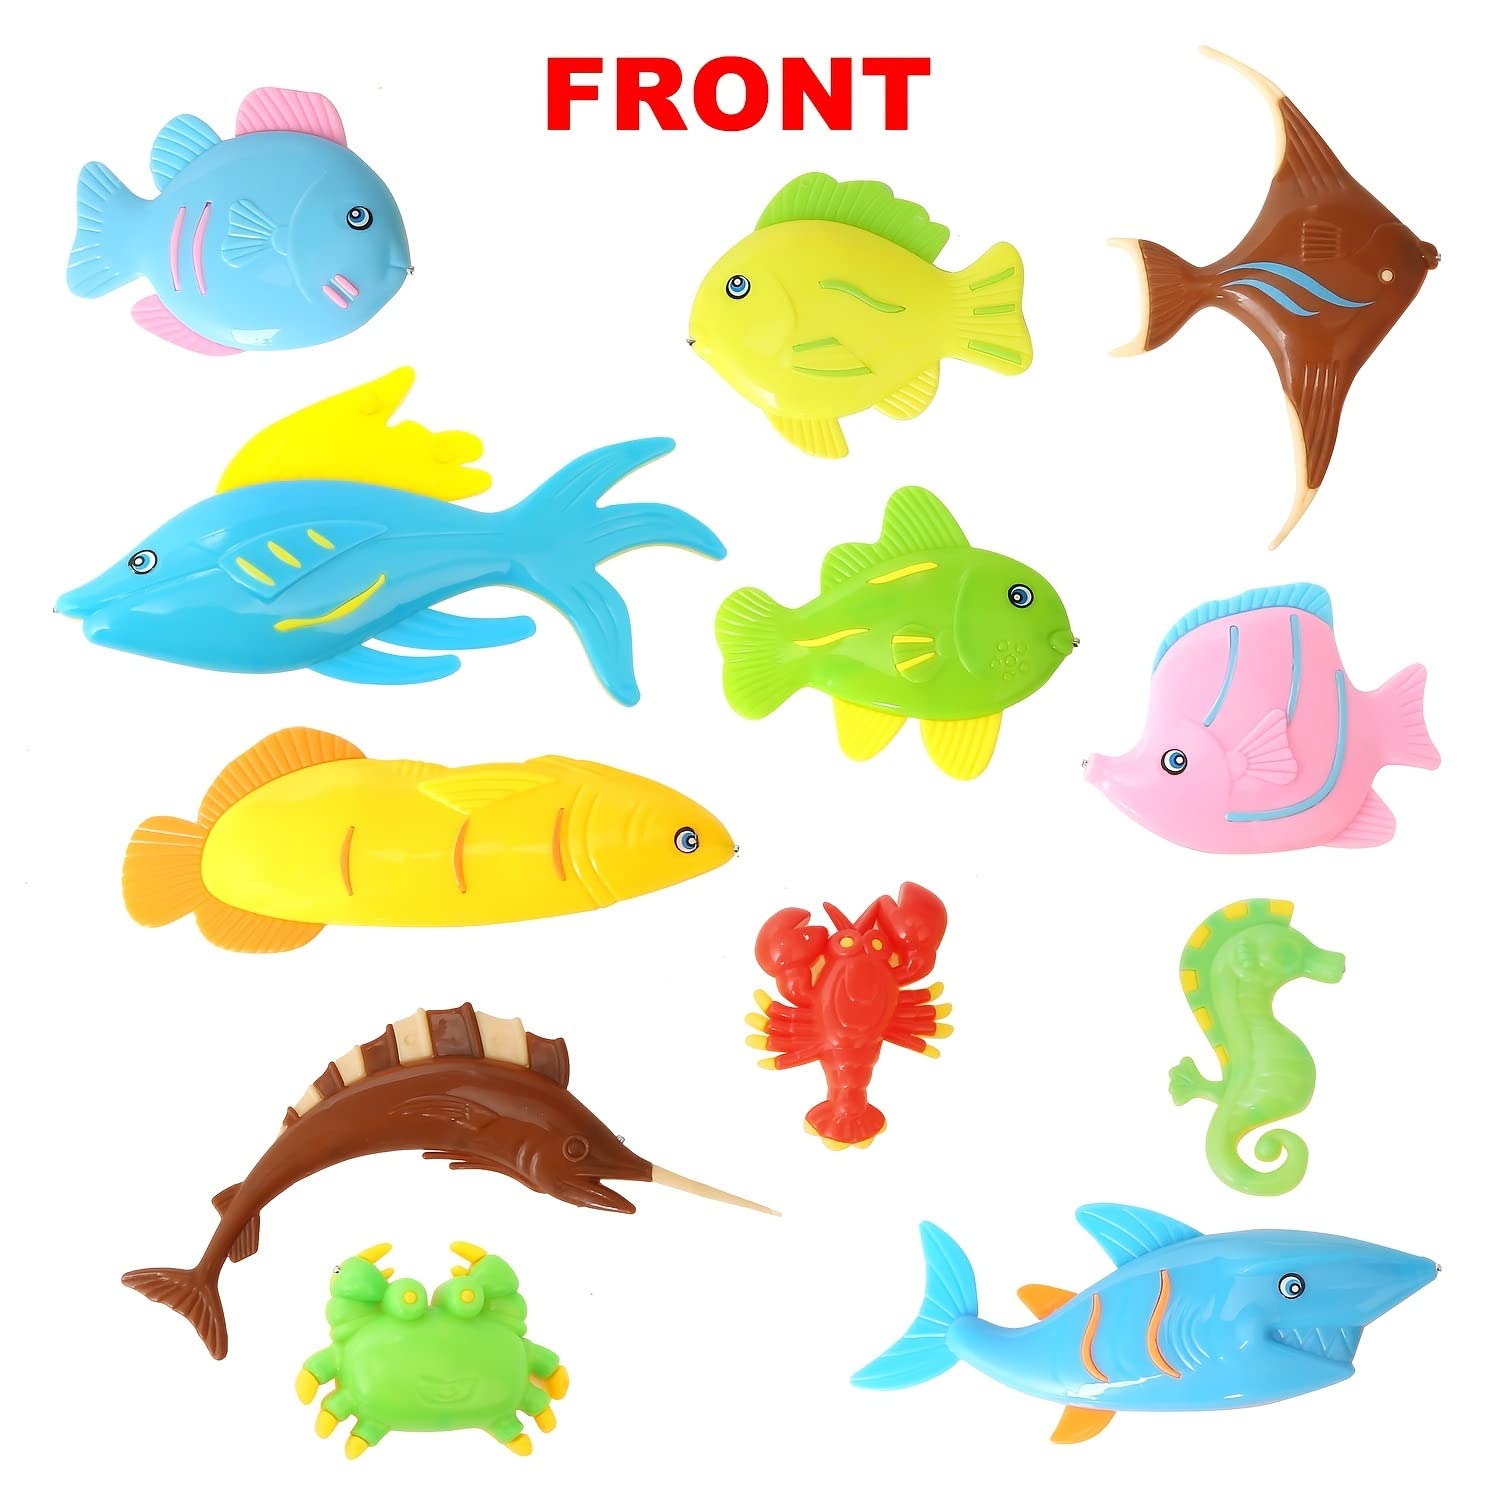 Bath Toys for Kids - Magnetic Fishing Bathtub Toys, Kiddie Water Bath Toys with Pole Rod Plastic Floating Fish Toddler Colorful Ocean Sea Animals, Bath Toy, Pool Toys, Bath Toys for Toddlers 1-3 Gifts